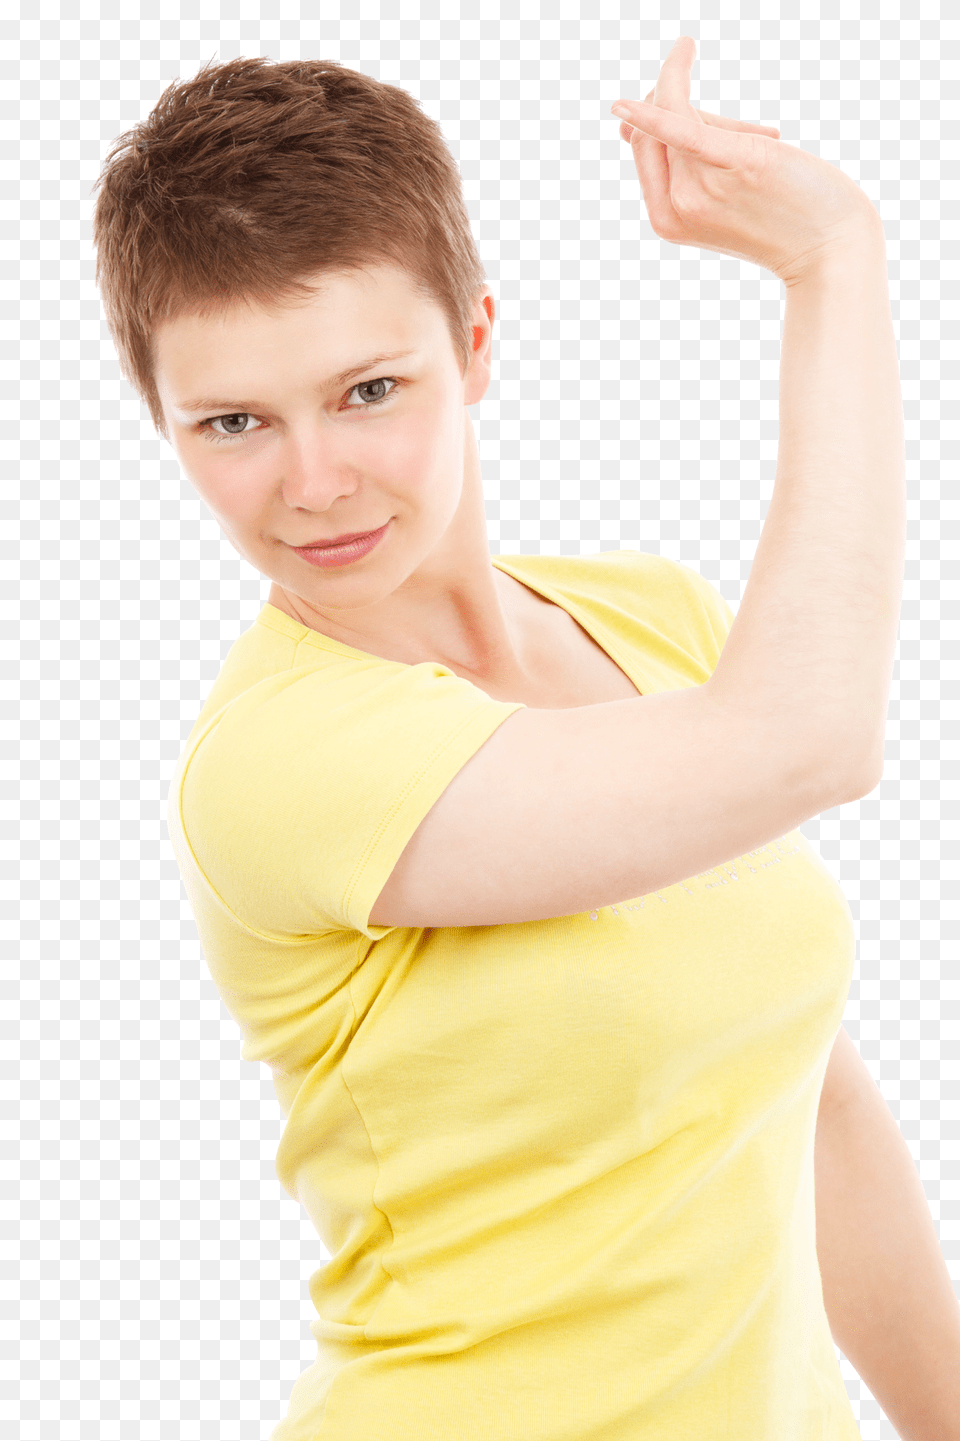 Pngpix Com Beautiful Young Woman Wearing Casual Dress Image, Hand, Body Part, Person, Finger Png